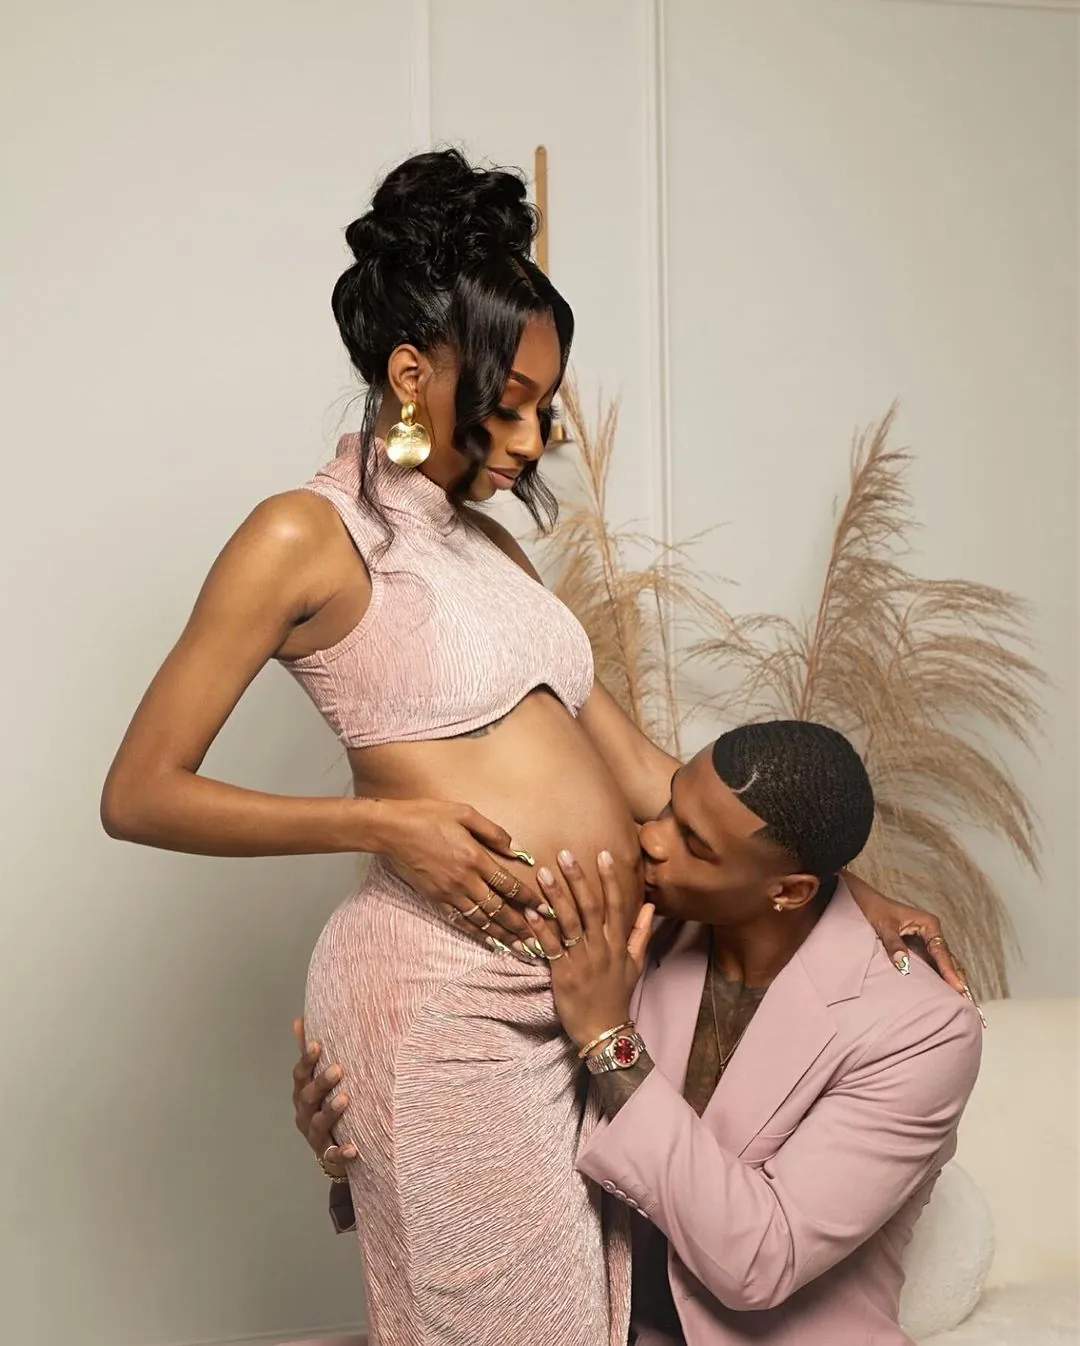 Lala Milan Announced She Is Expecting A Baby With Tyler Parker!